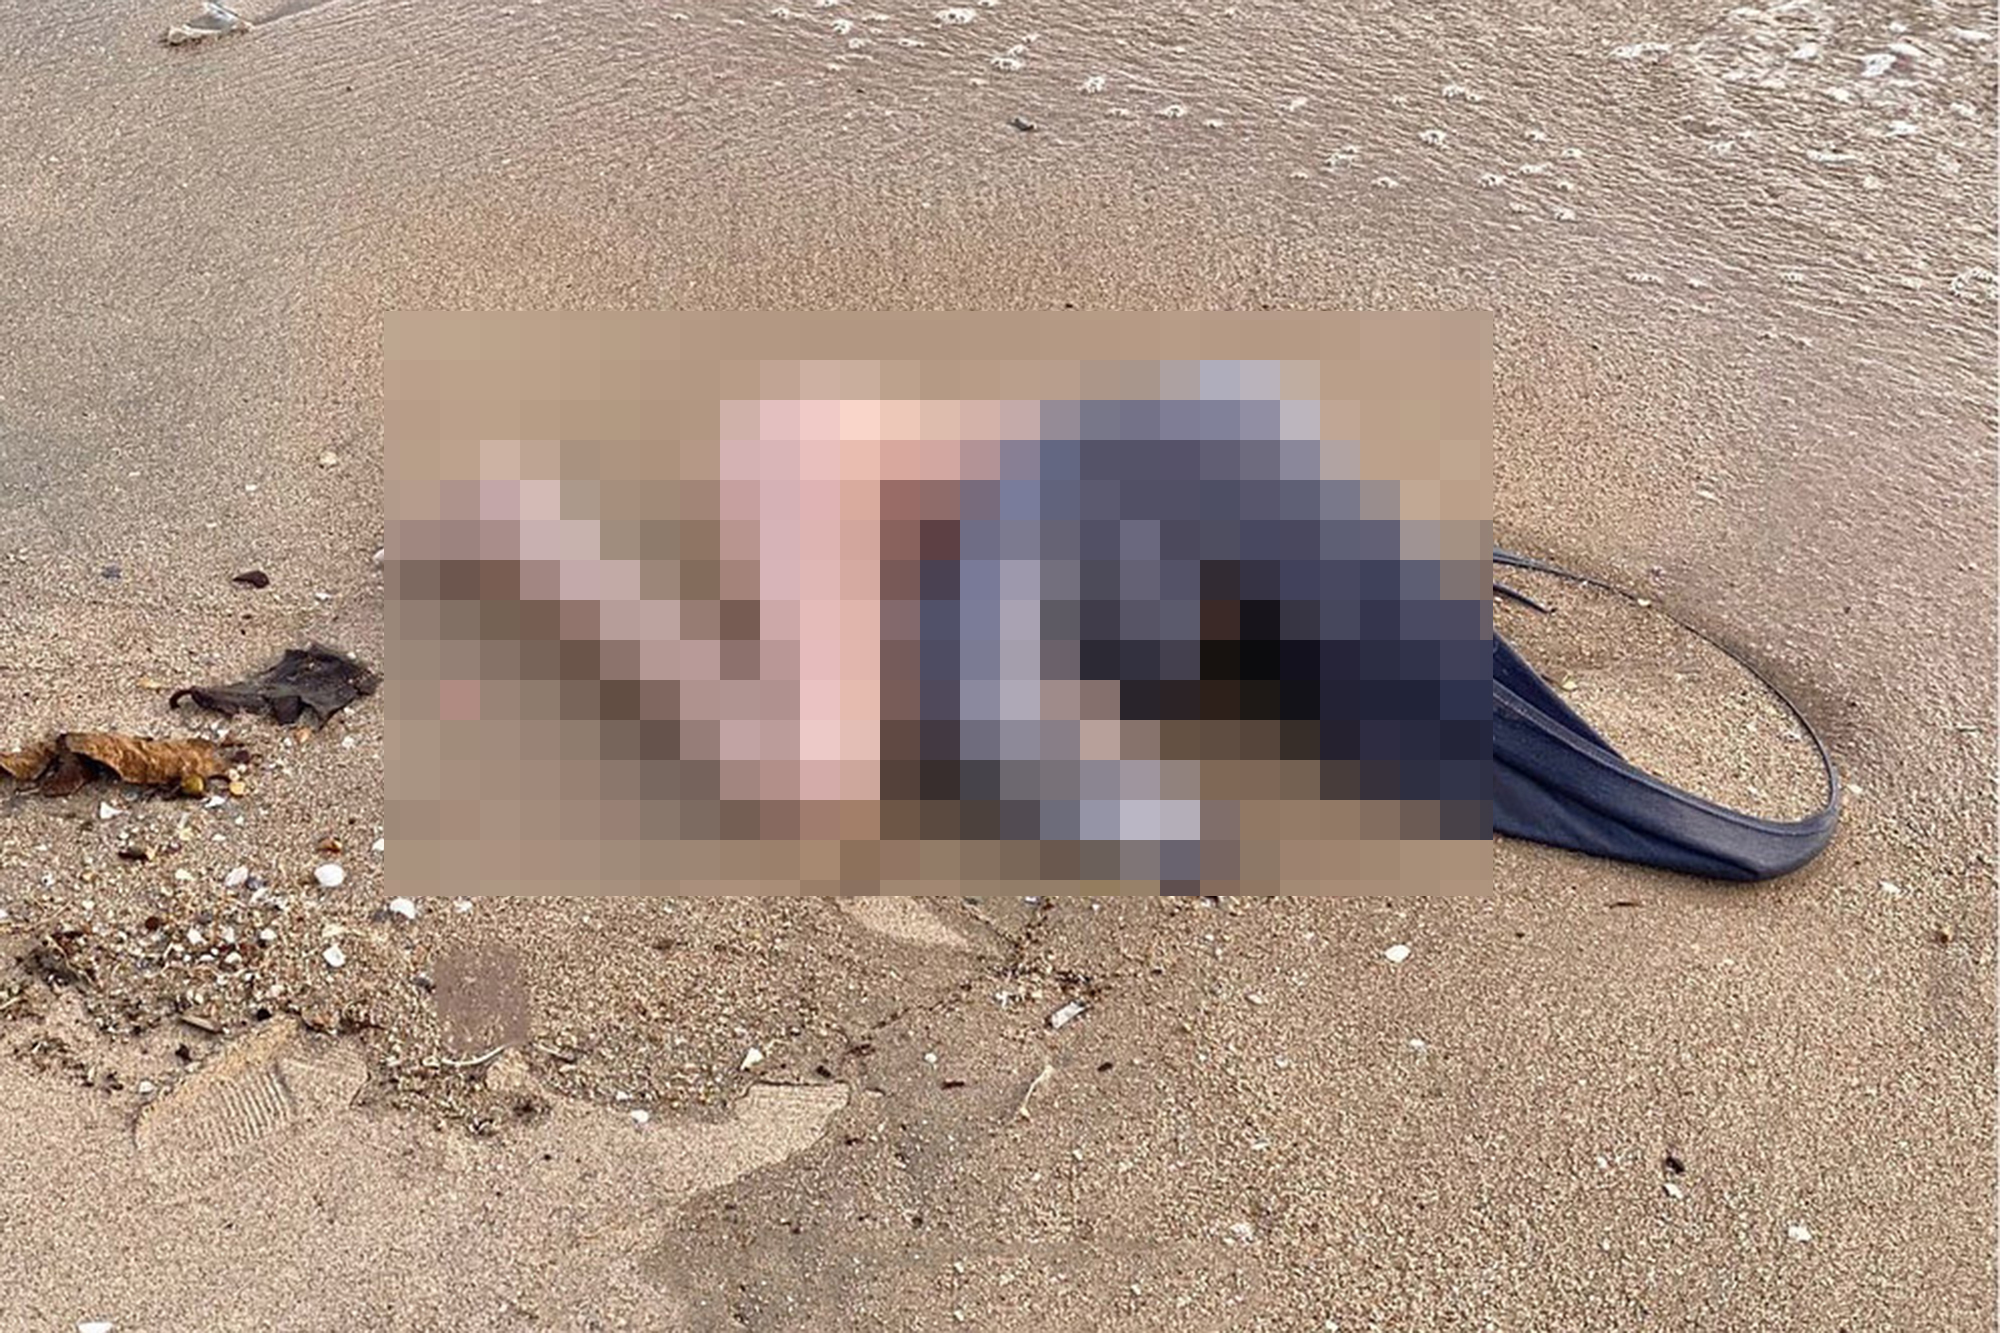 Thai police were flabbergasted after discovering that a "dead body" on a beach was actually a discarded sex doll.